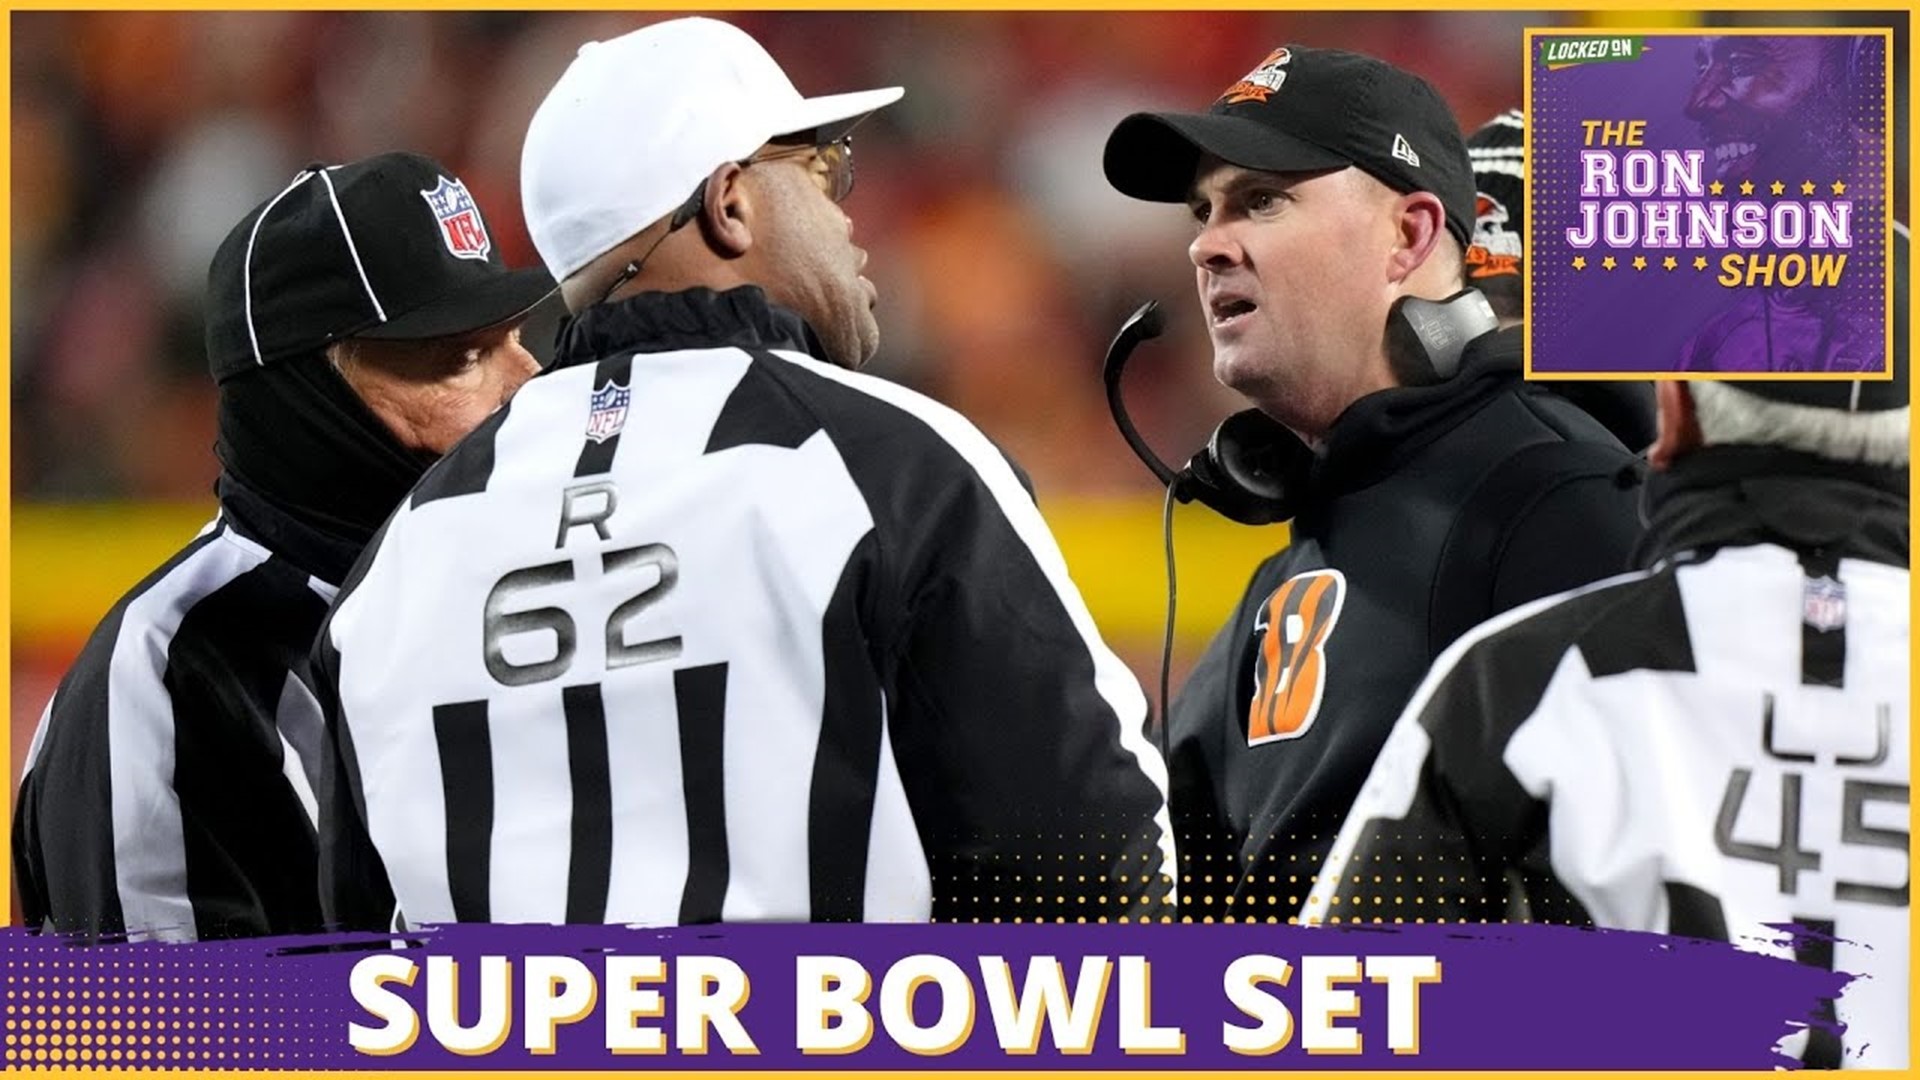 The Super Bowl matchup is set between the Kansas City Chiefs and Philadelphia Eagles, and Ron Johnson weighs in on both conference championship games.